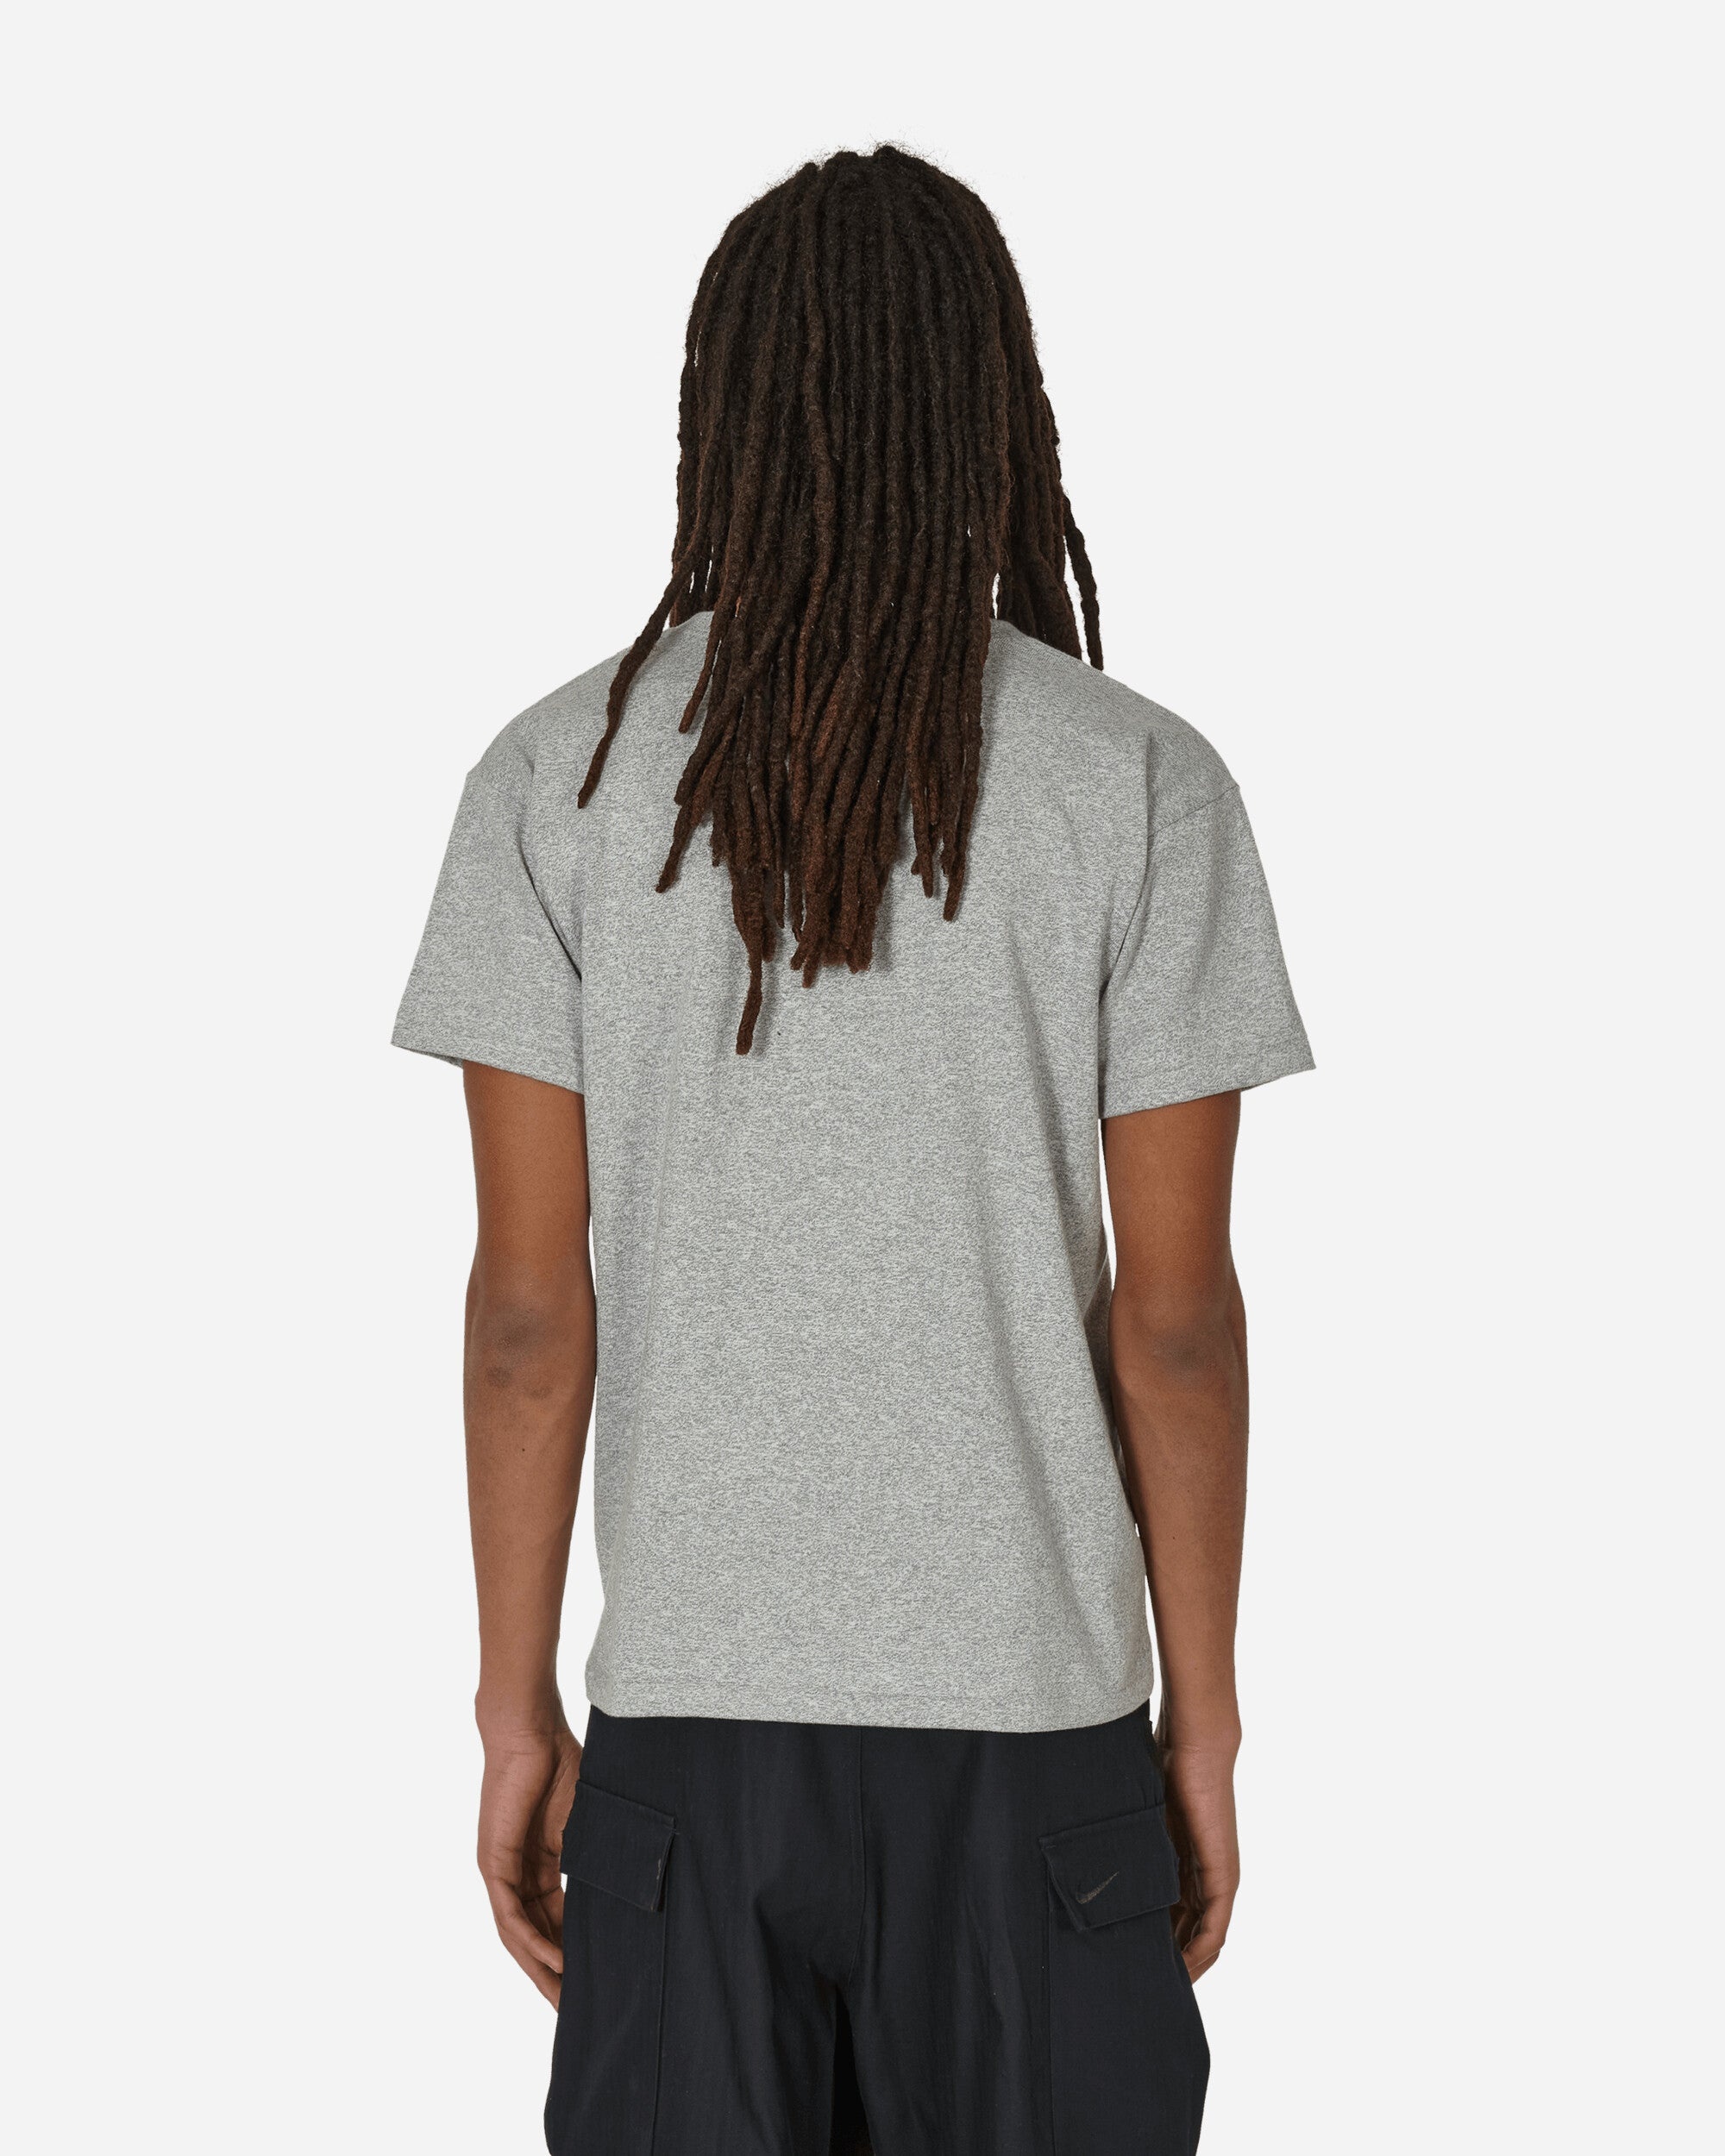 Made in Japan V-Neck T-Shirt Oxford Gray - 3